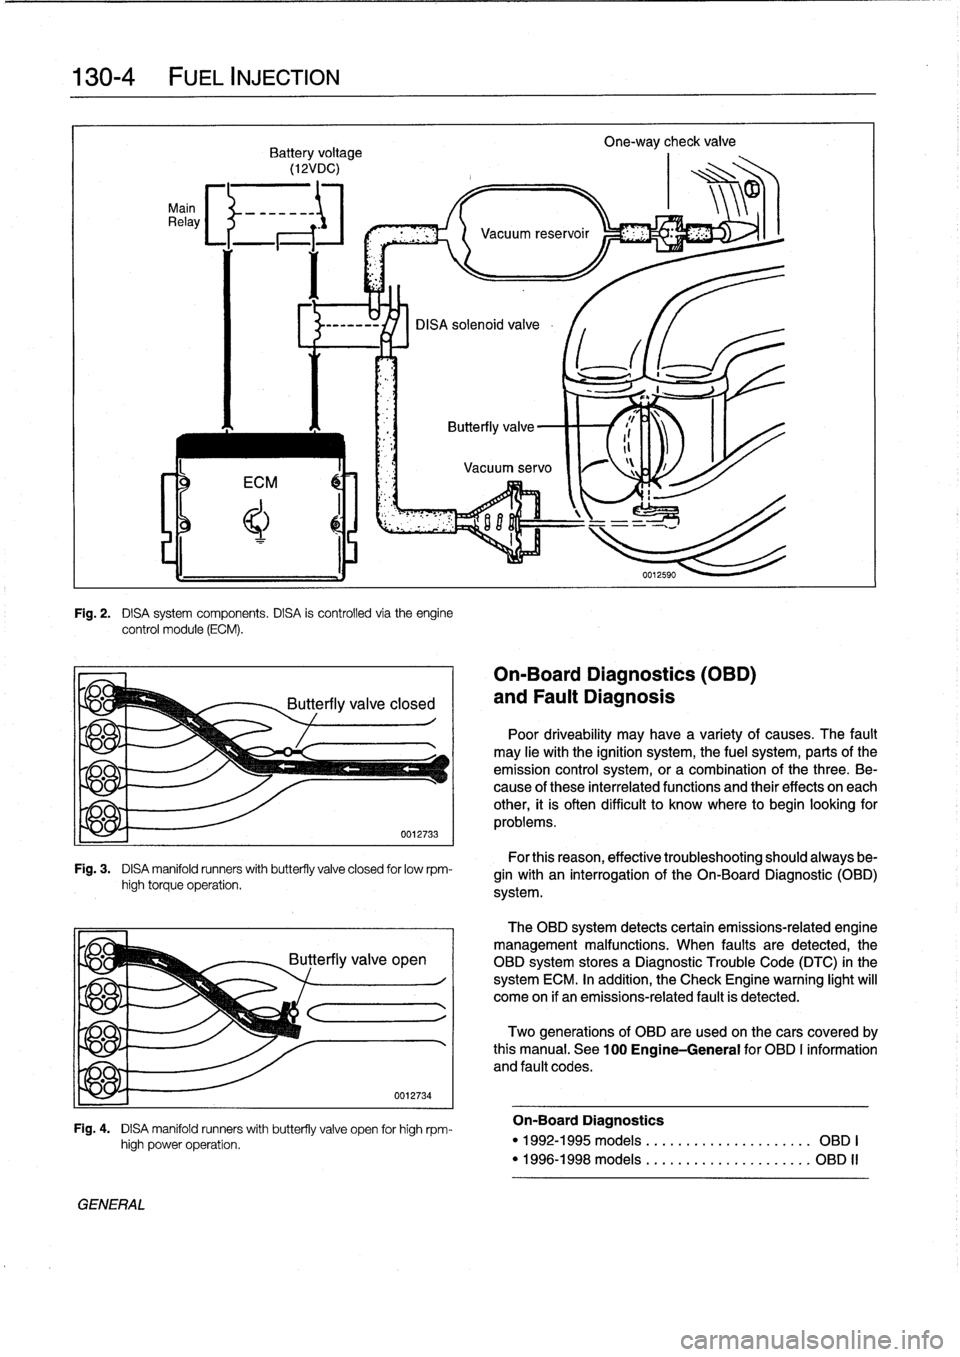 BMW 318i 1995 E36 Owners Manual 
130-
4

	

FUEL
INJECTION

Main
Relay

Fig
.
2
.

	

DISA
system
components
.
DISA
is
controlled
via
theengine
control
module
(ECM)
.

Fig
.
3
.

	

DISA
manifold
runners
with
butterfly
valve
closed
